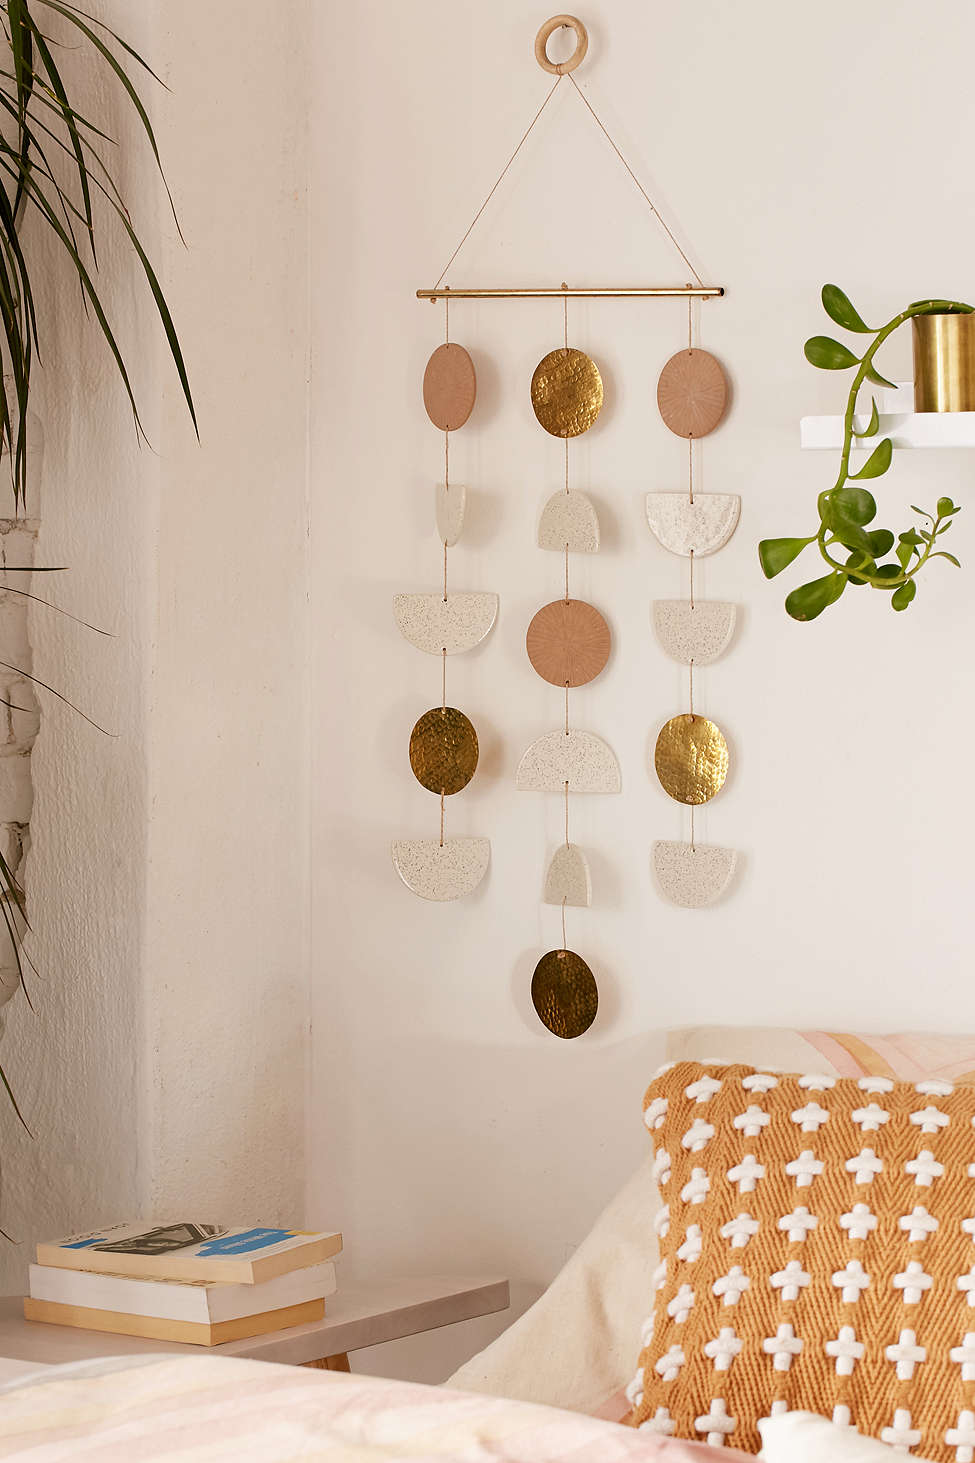 Geo wall hanging from Urban Outfitters